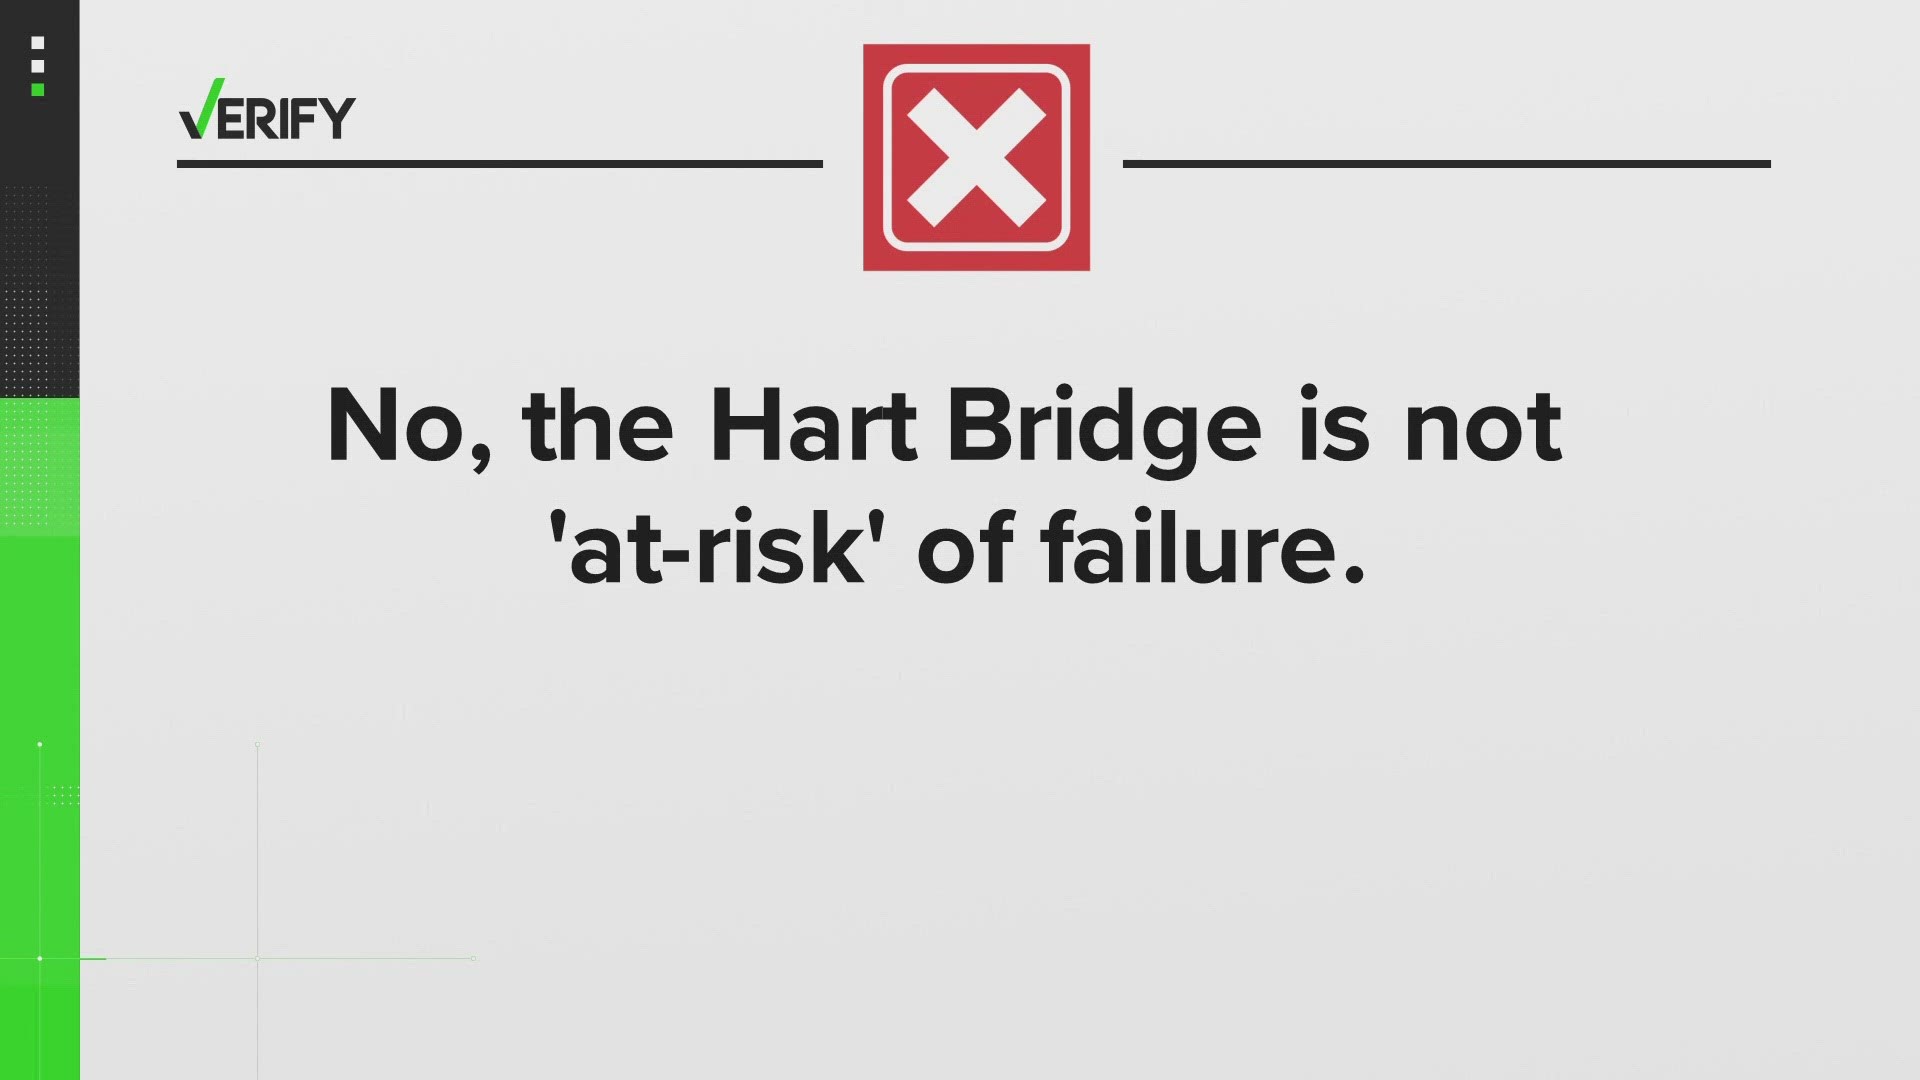 A graphic posted by the Daily Mail suggests Jacksonville's Hart Bridge is 'at risk' of failing. We VERIFIED these claims.